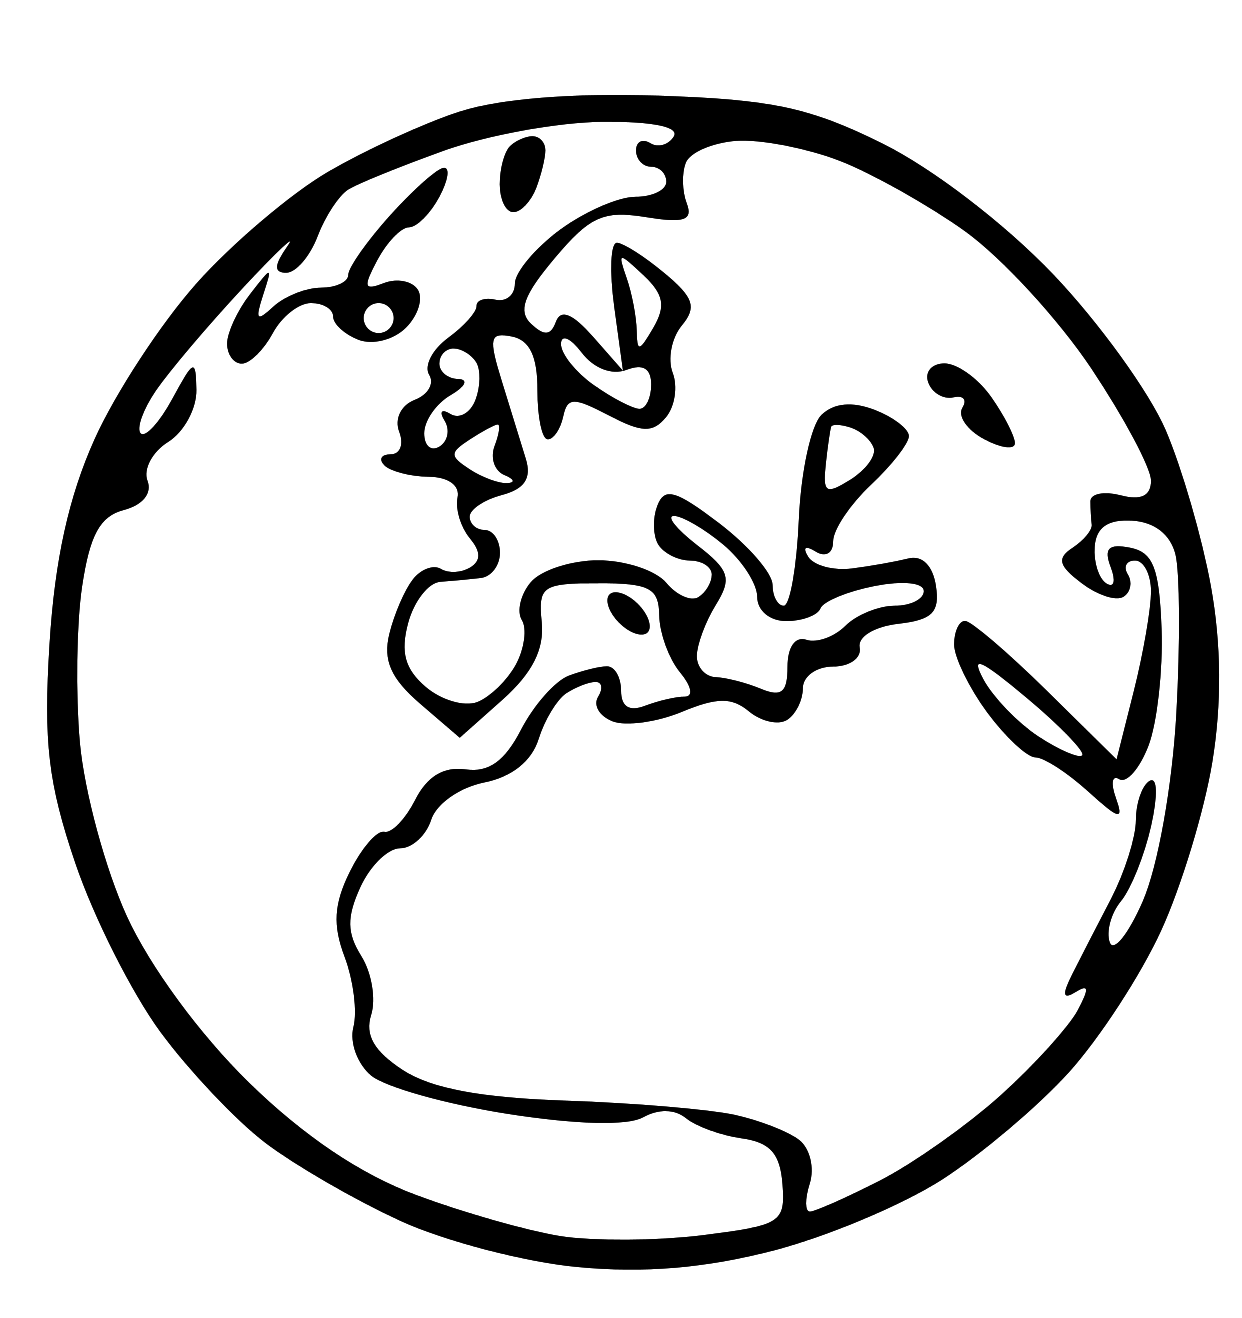 Lds Clipart  Earth   Clipart Panda   Free Clipart Images